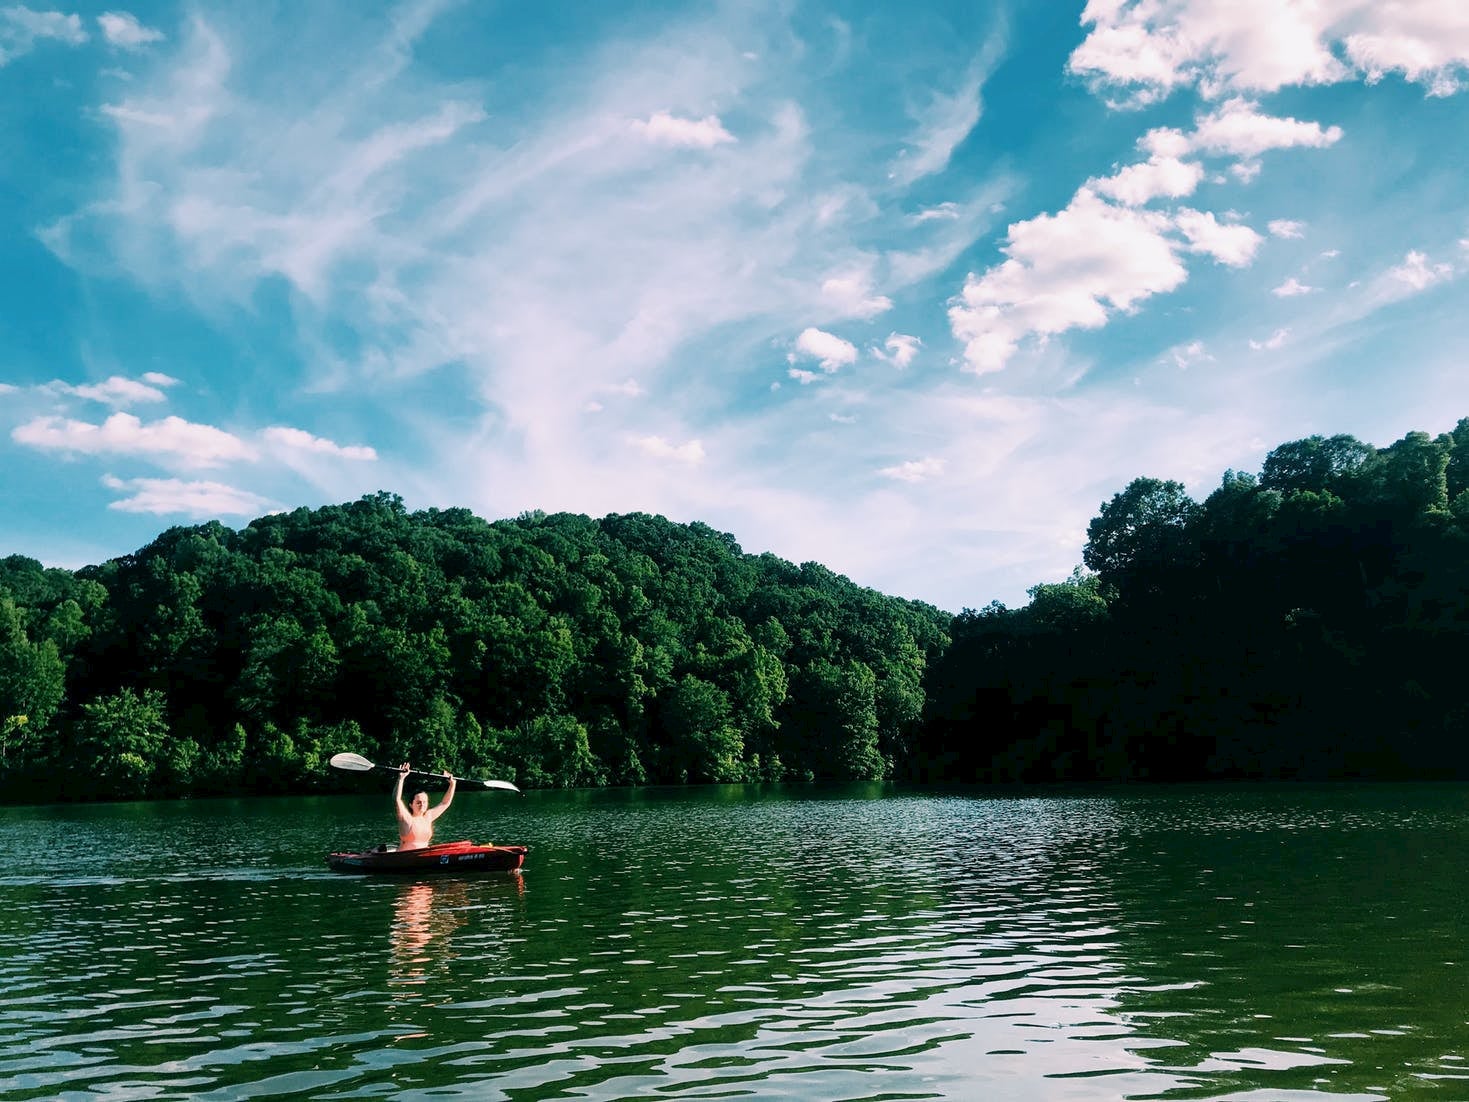 Kayaker raising their paddle overhead while floating in a lake.